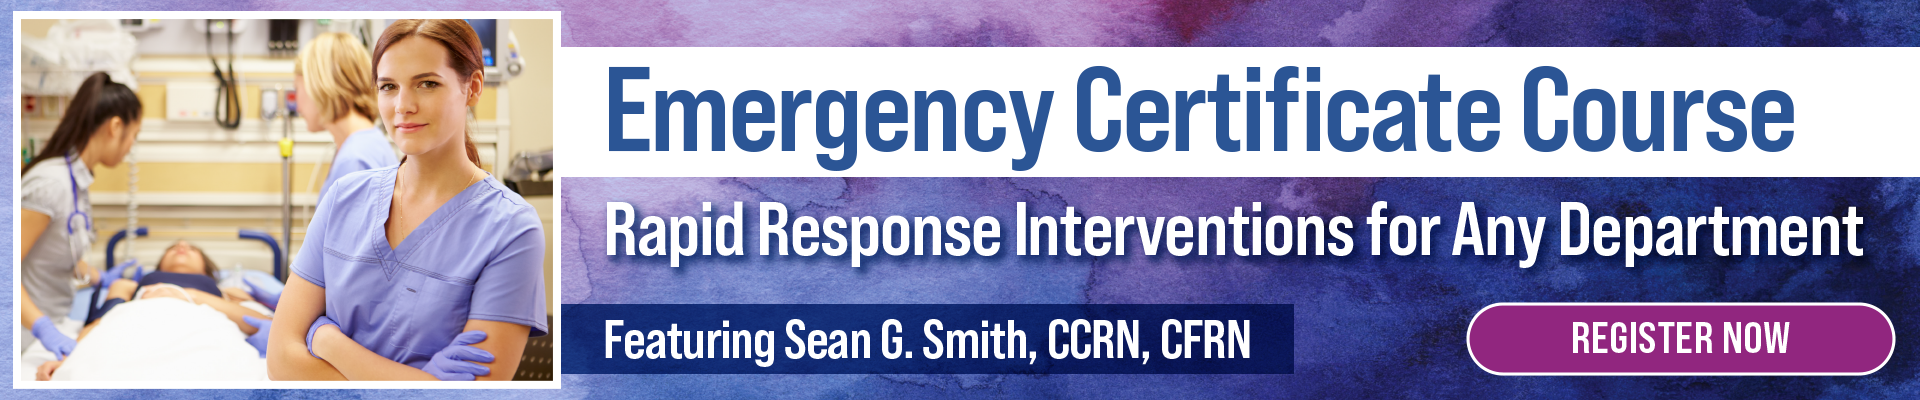 Emergency Certificate Course: Rapid Response Interventions for Any Department